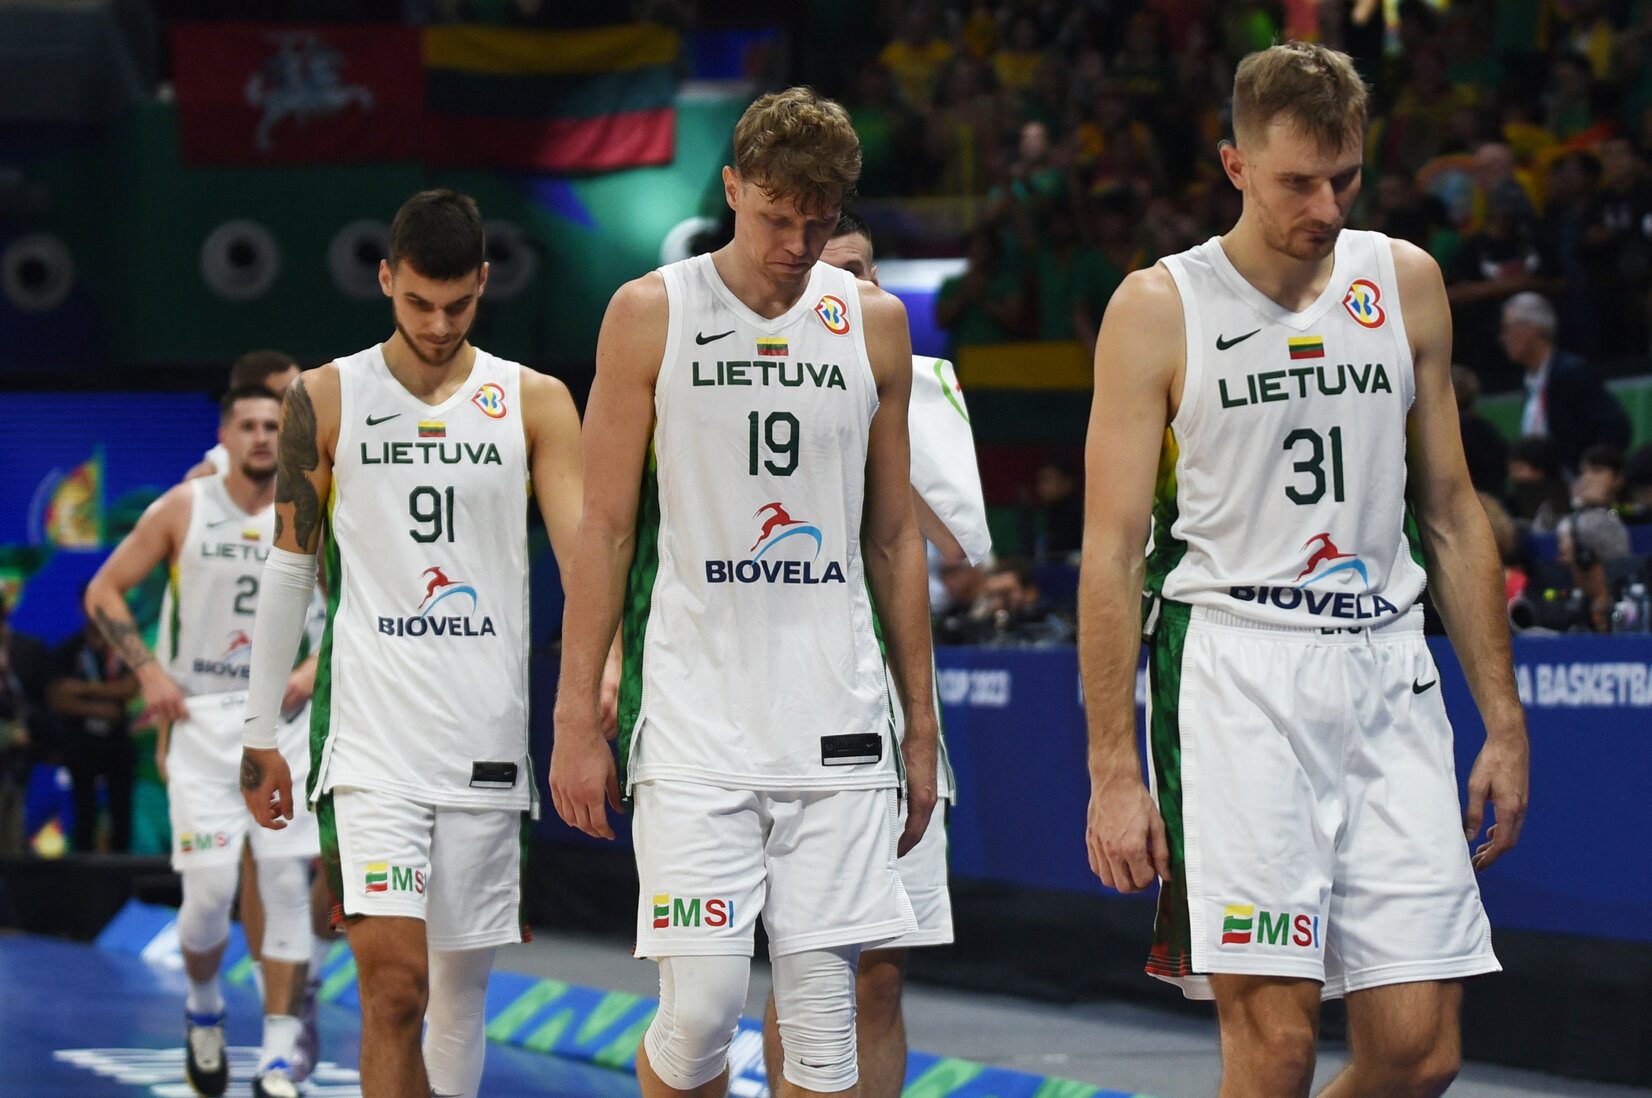 ‘Now it’s nothing’: Ousted Lithuania rues missed chance after shocking USA